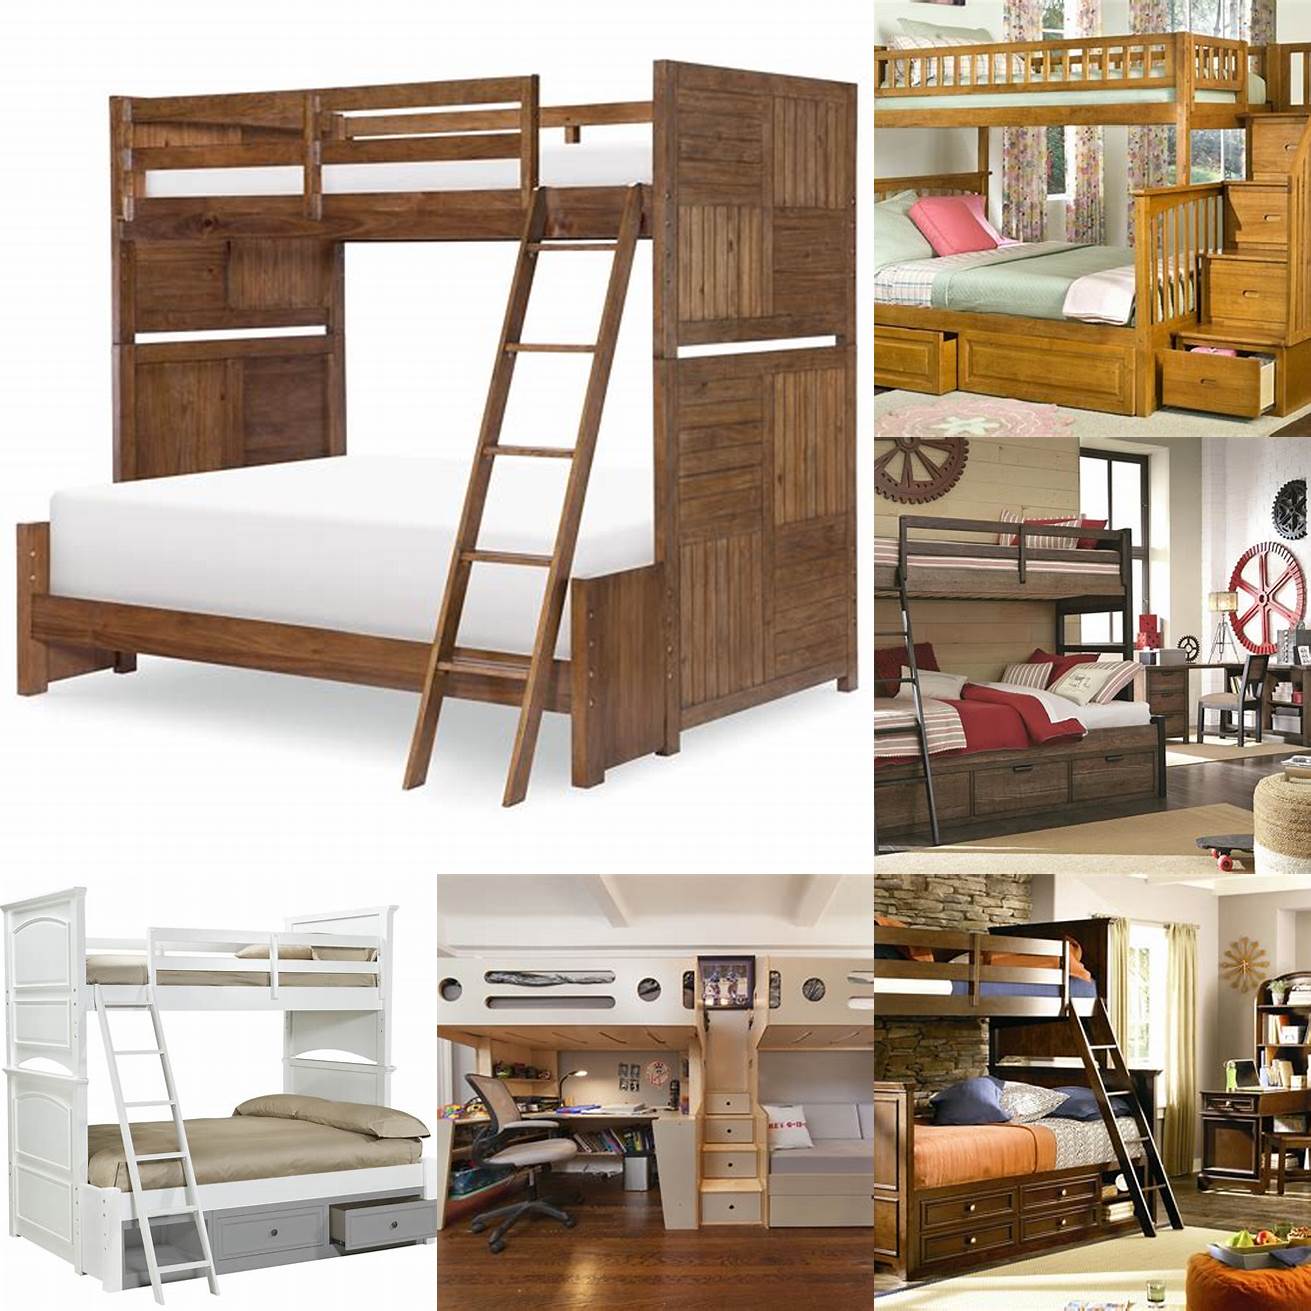 A bunk bed is a classic example of multipurpose furniture It can be used as a sleeping option for two people and can also save floor space in a small room